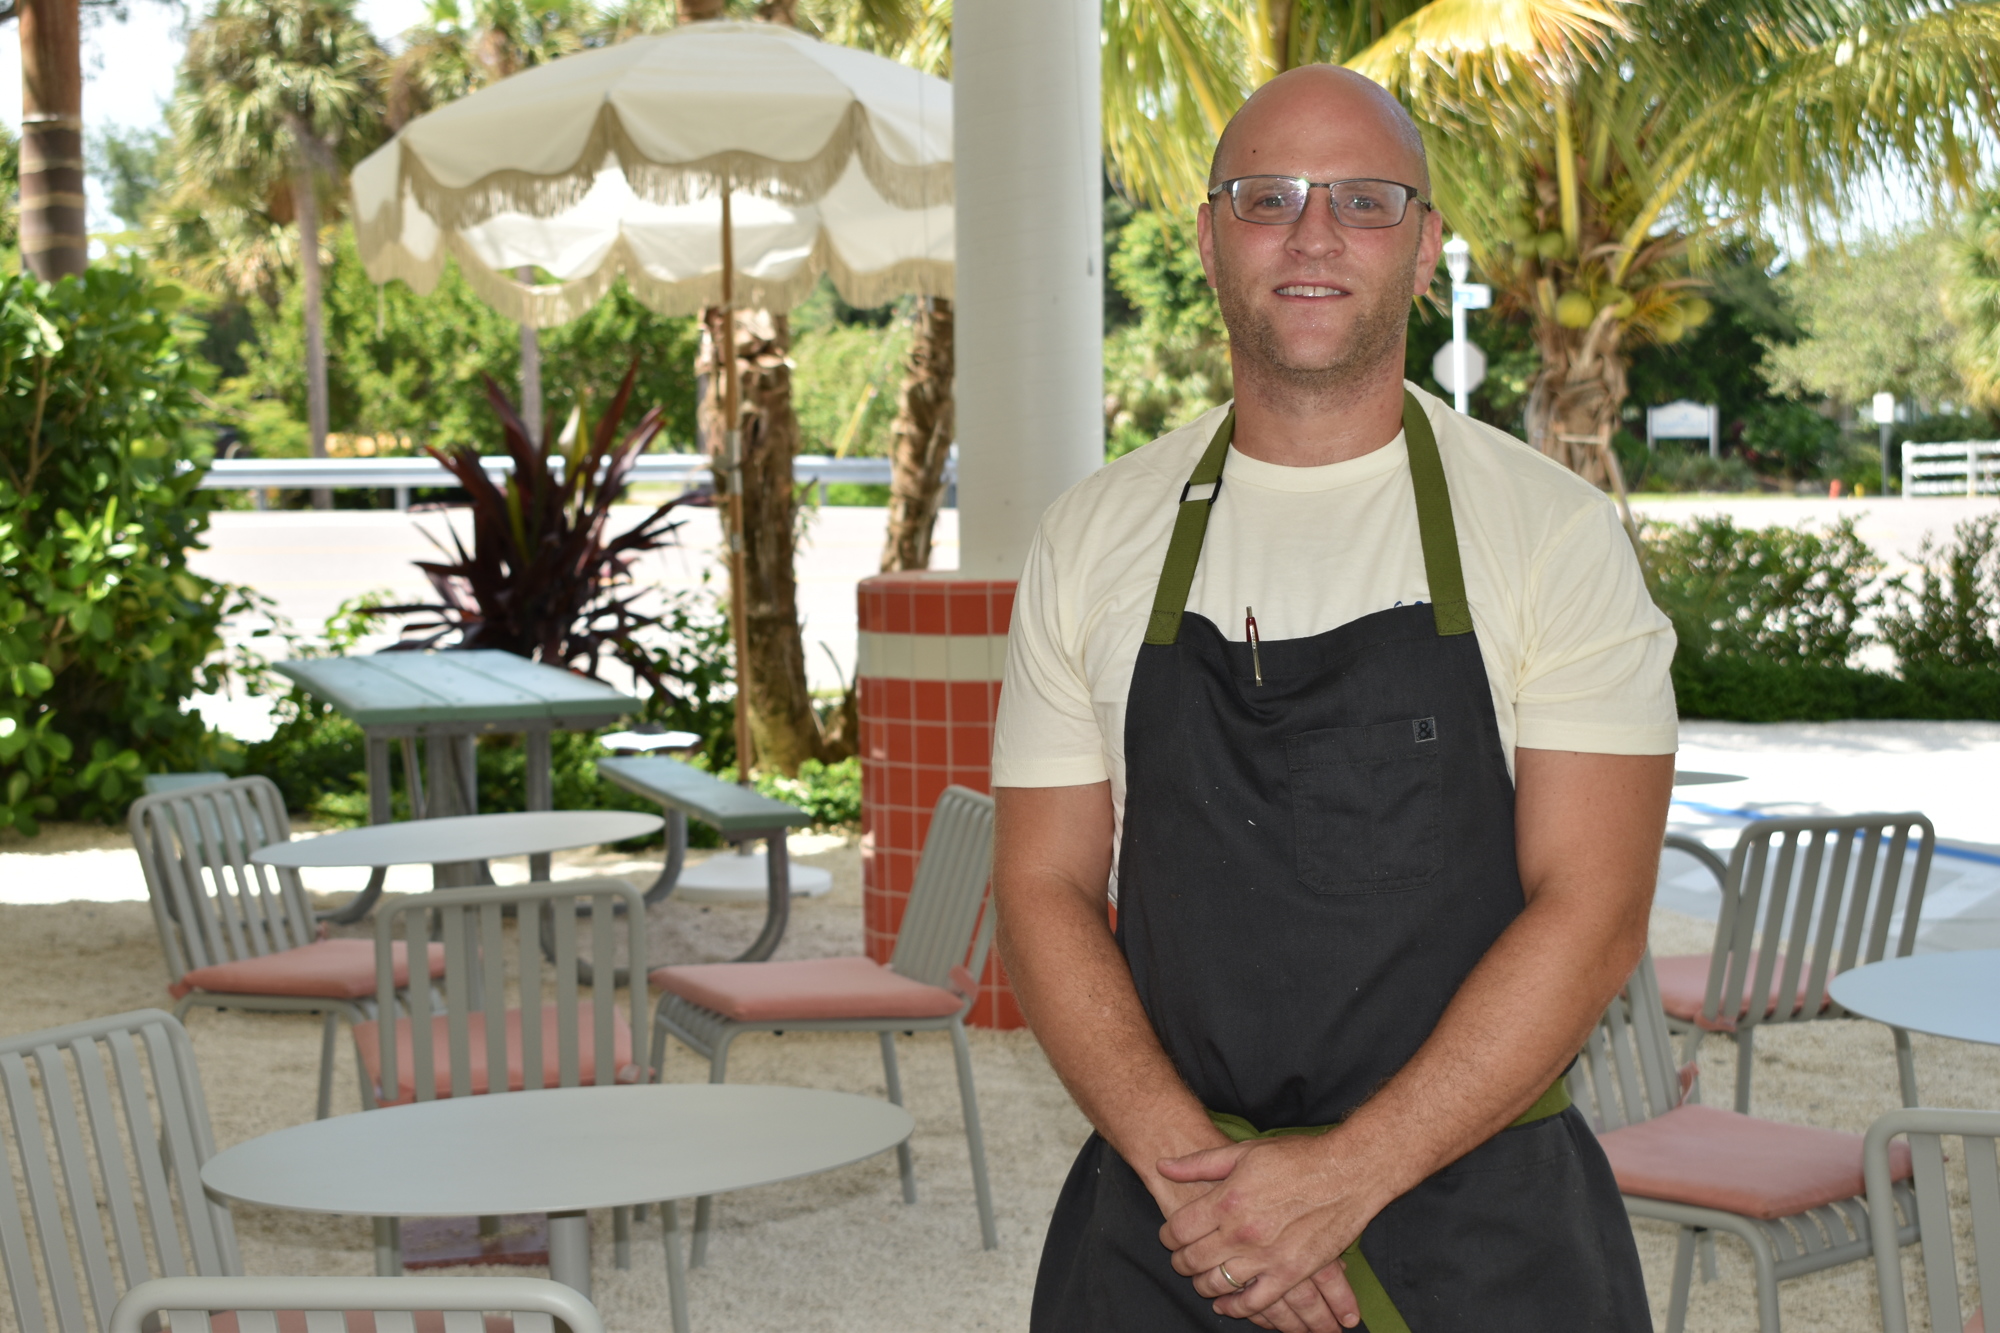 Whitney's executive chef and owner David Benstock said business has slowed down after Labor Day.